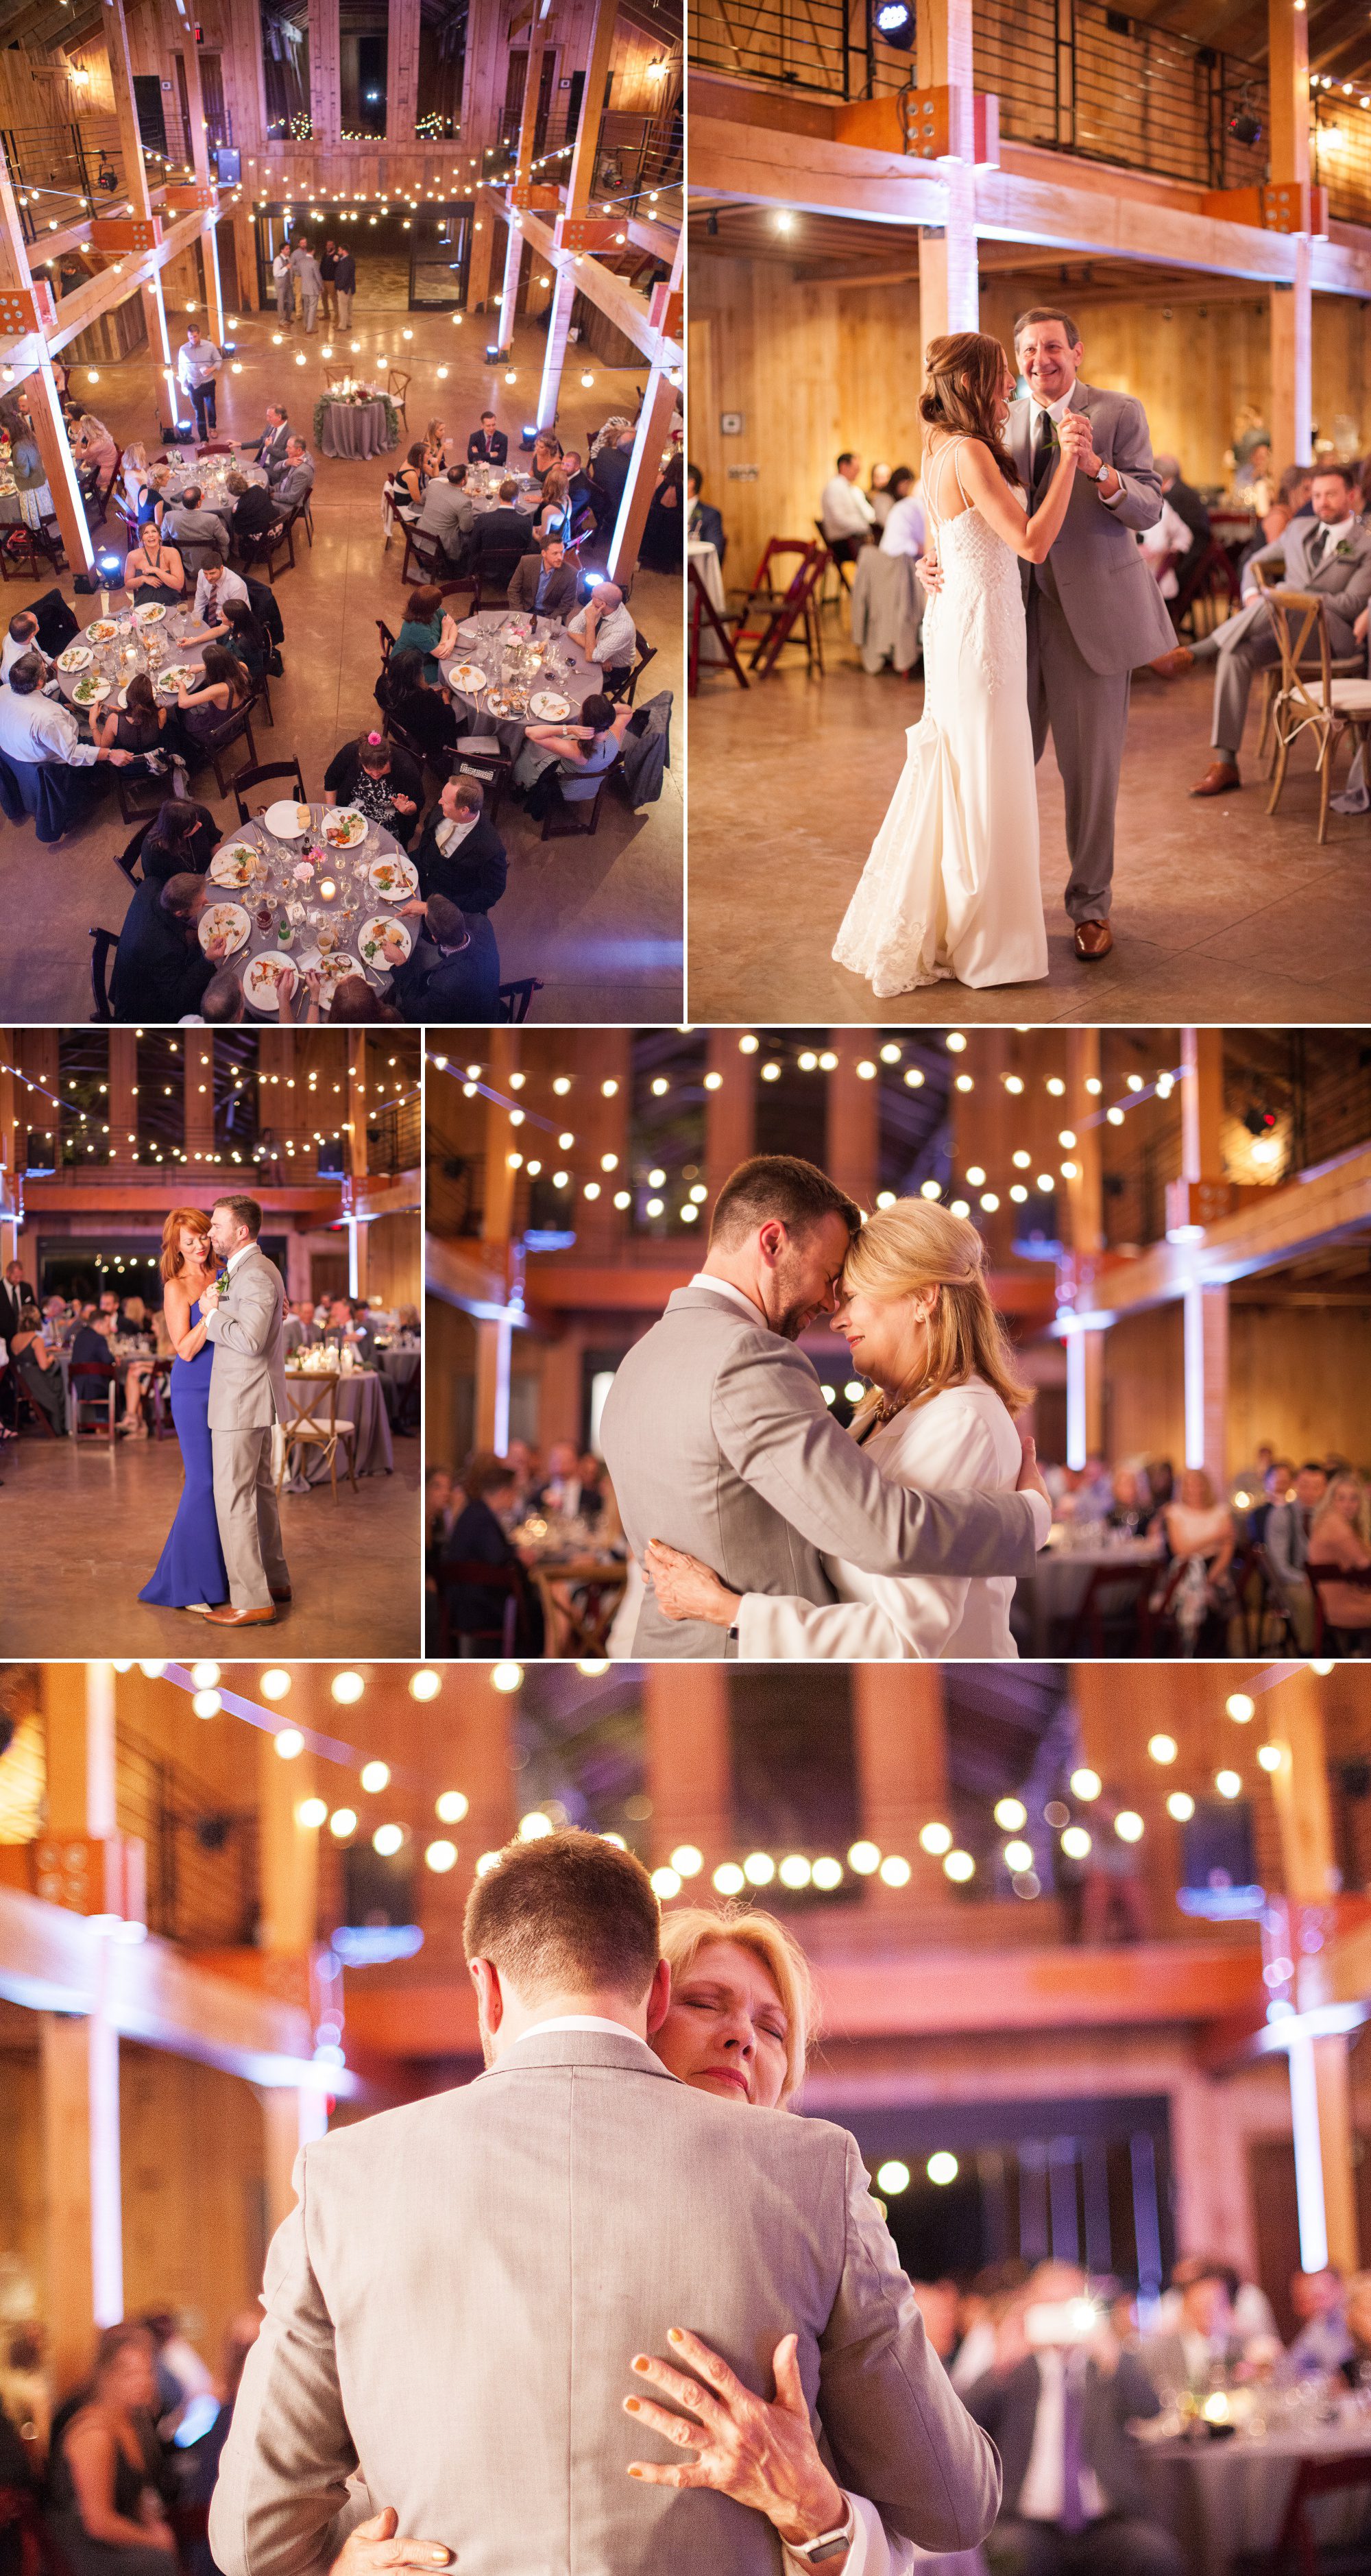 Guests at reception and mother son dance after wedding ceremony at Green Door Gourmet wedding in Nashville, TN